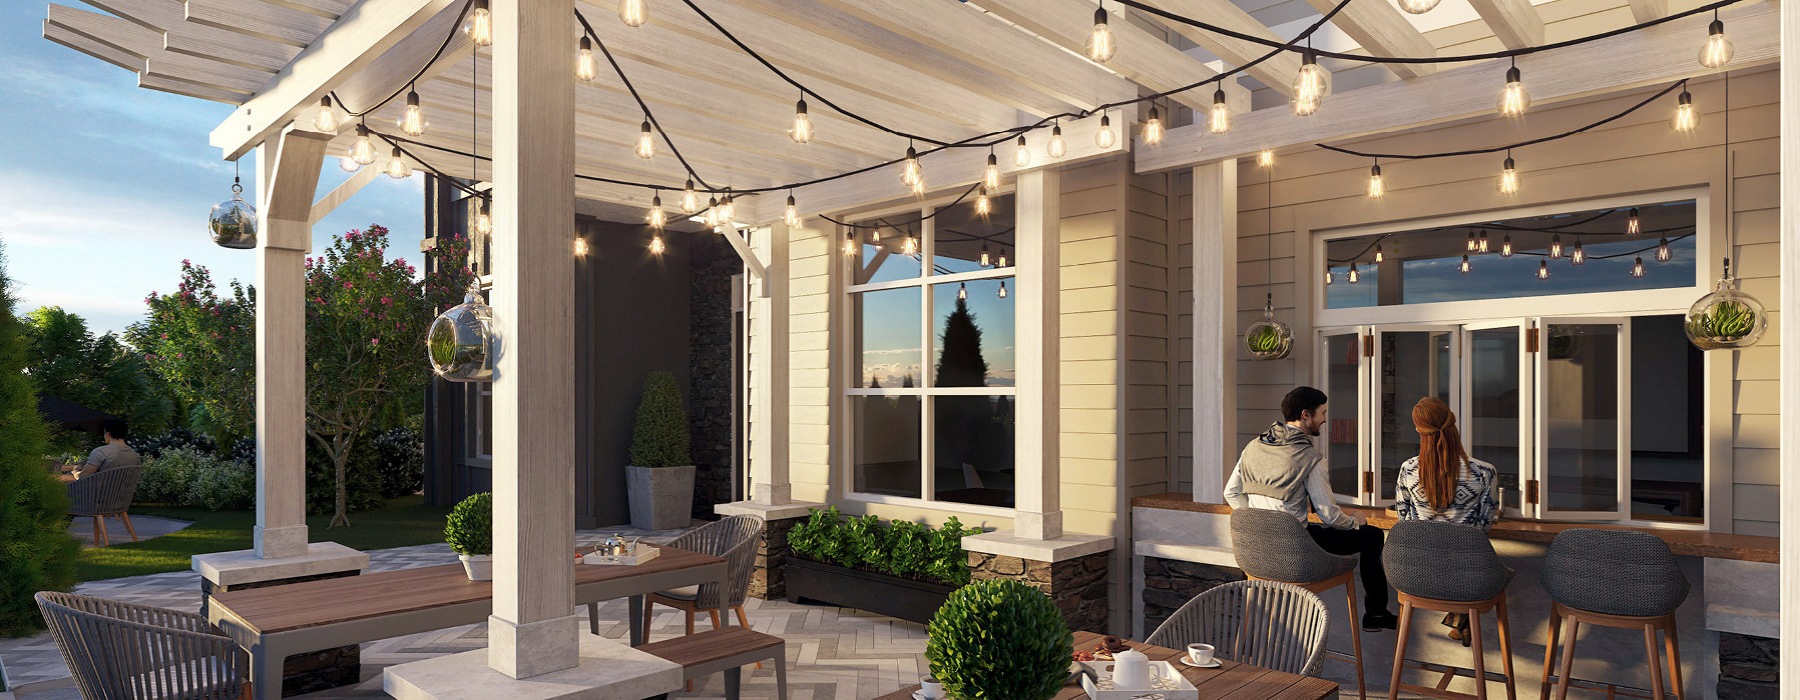 Outdoor covered patio with string lights